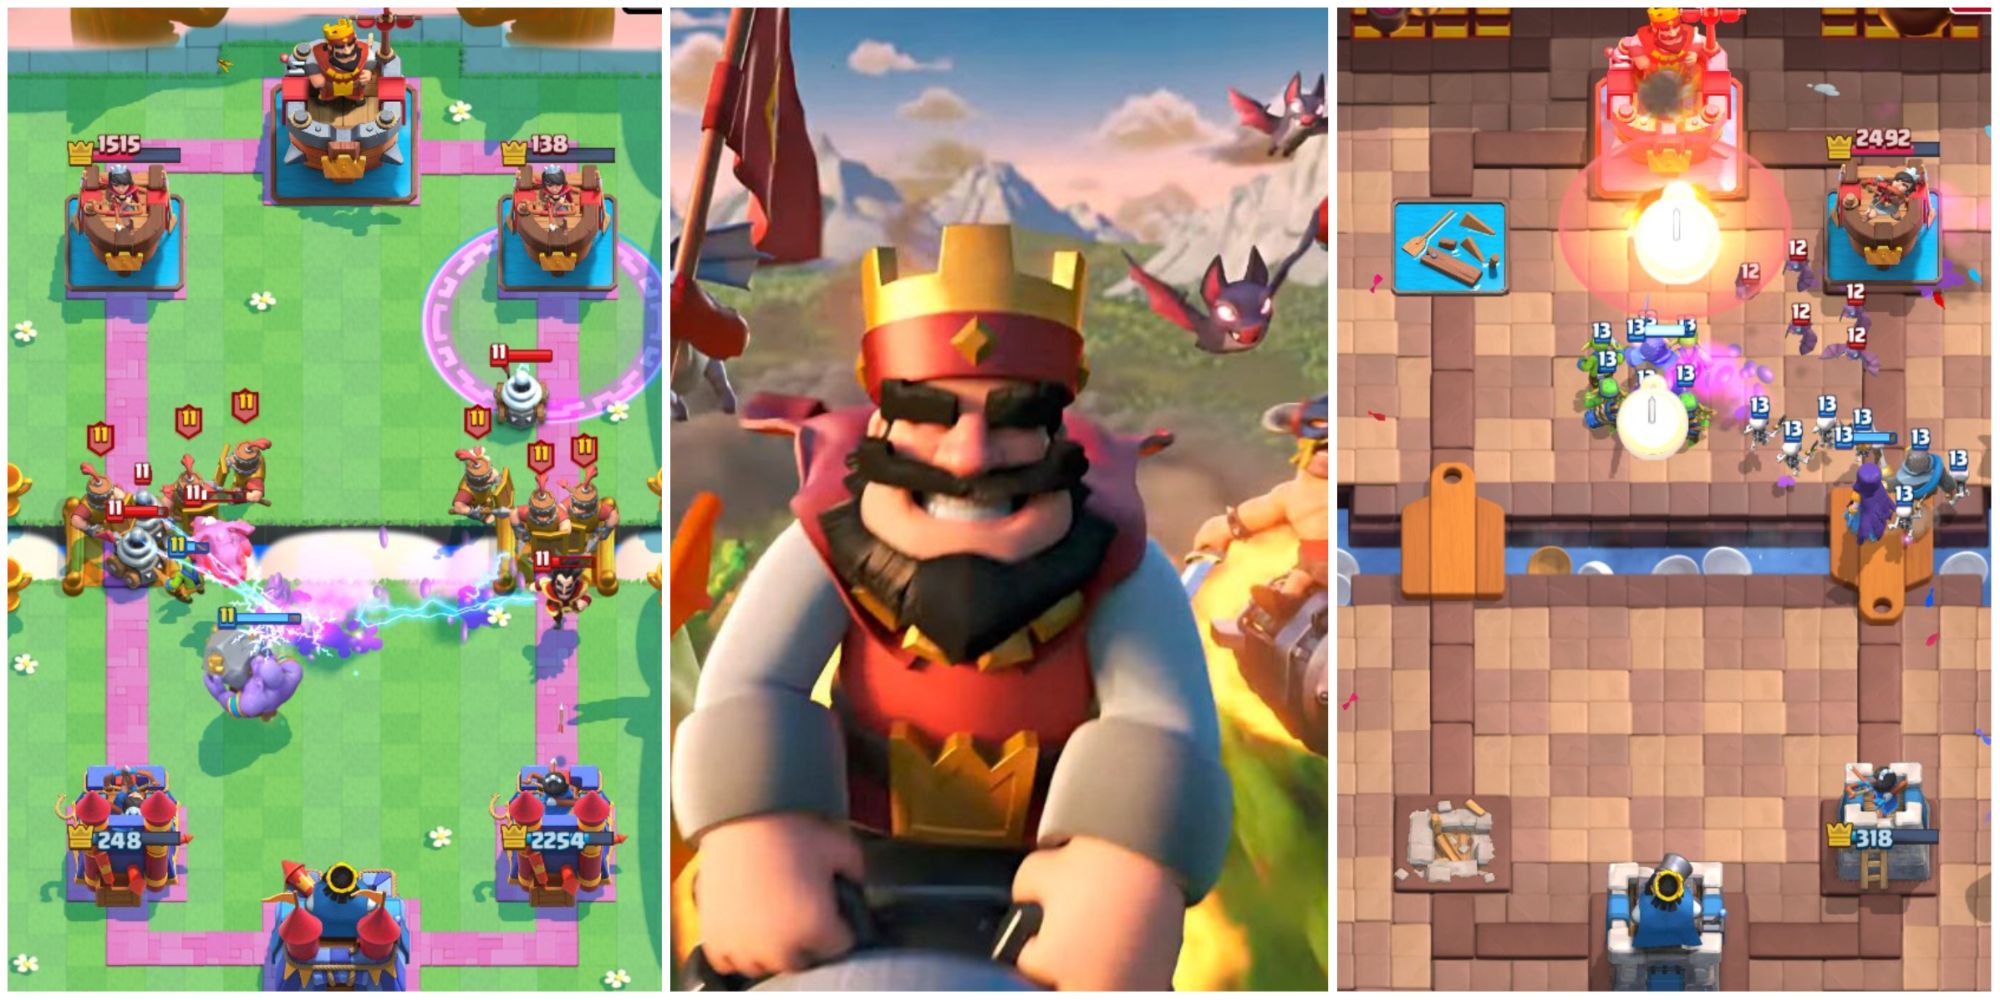 Clash Royale: Tips, tricks and strategy to move forward in the